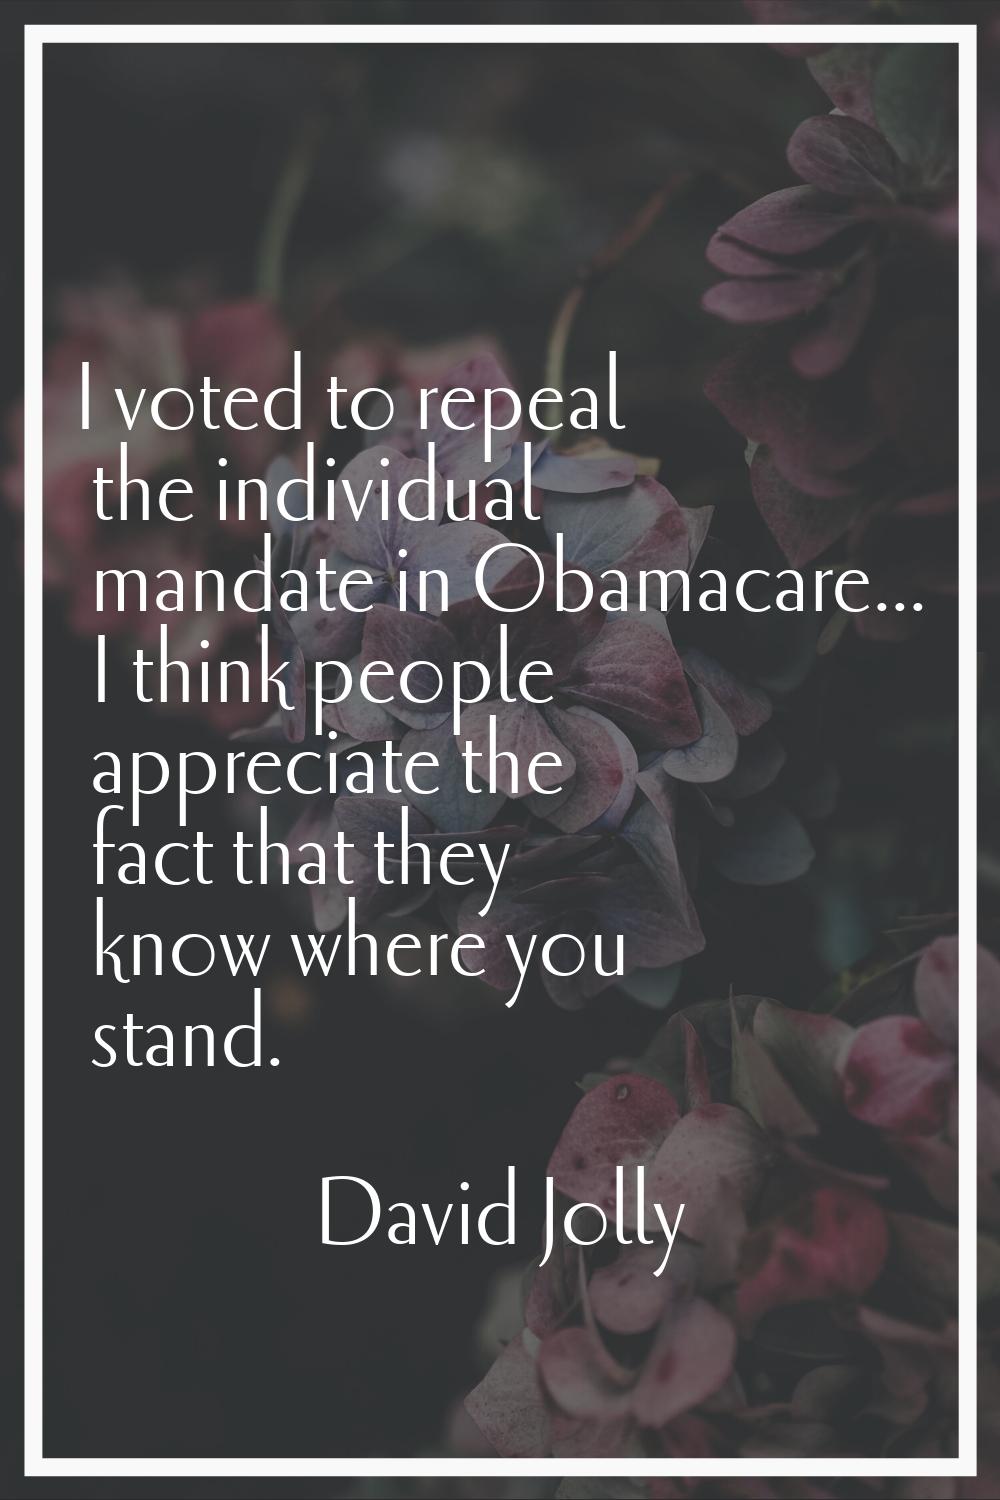 I voted to repeal the individual mandate in Obamacare... I think people appreciate the fact that th